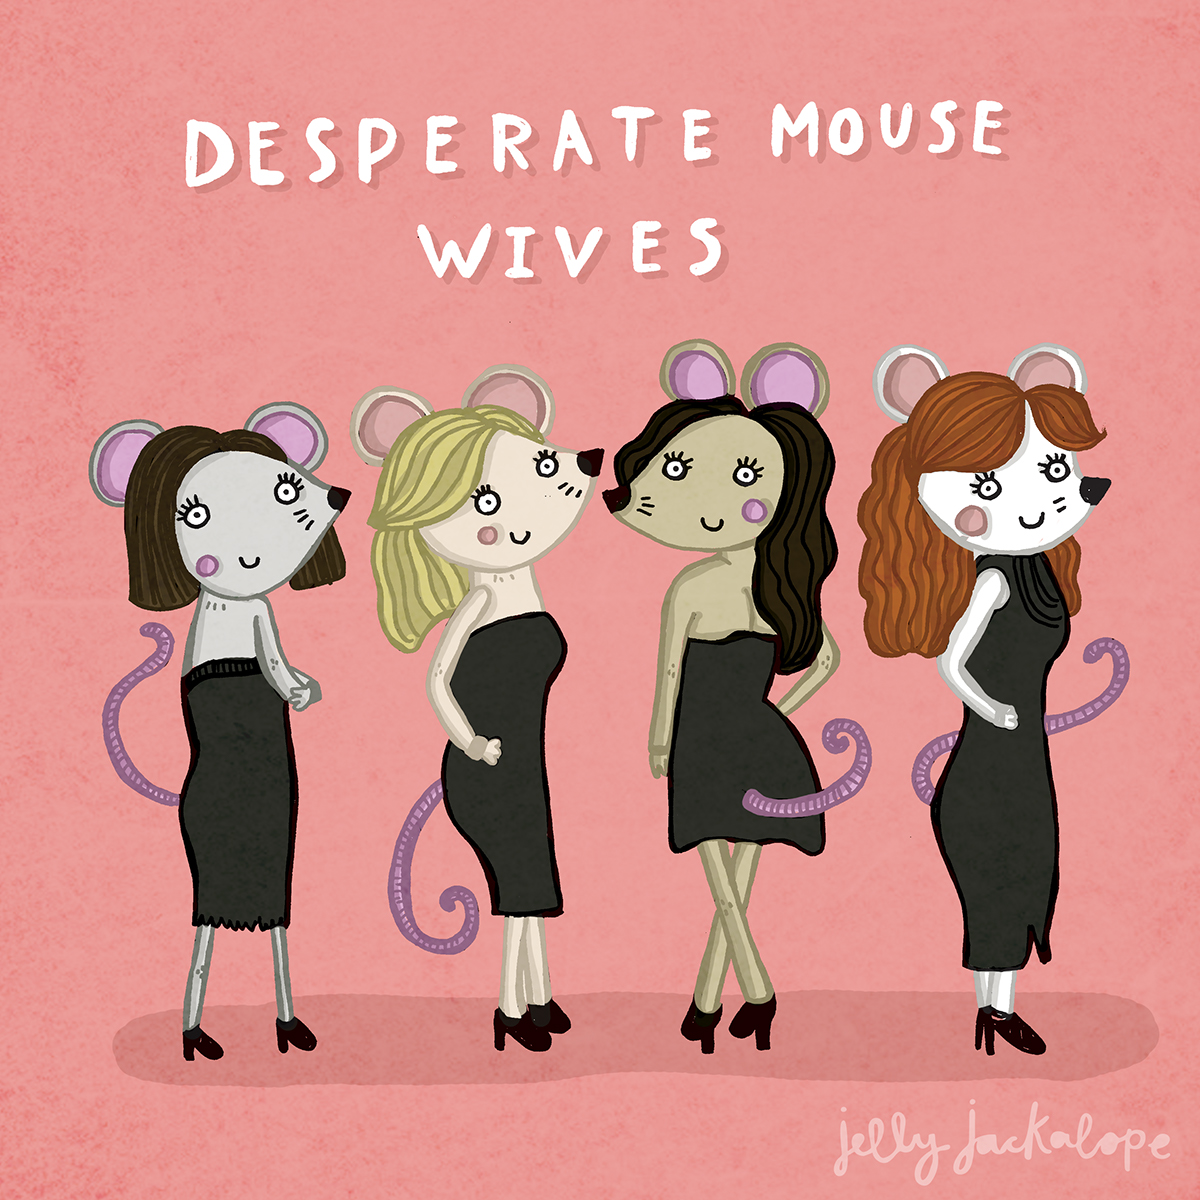 illustrations puns punny funny celebrities Wordplay PopCulture animals characters humour